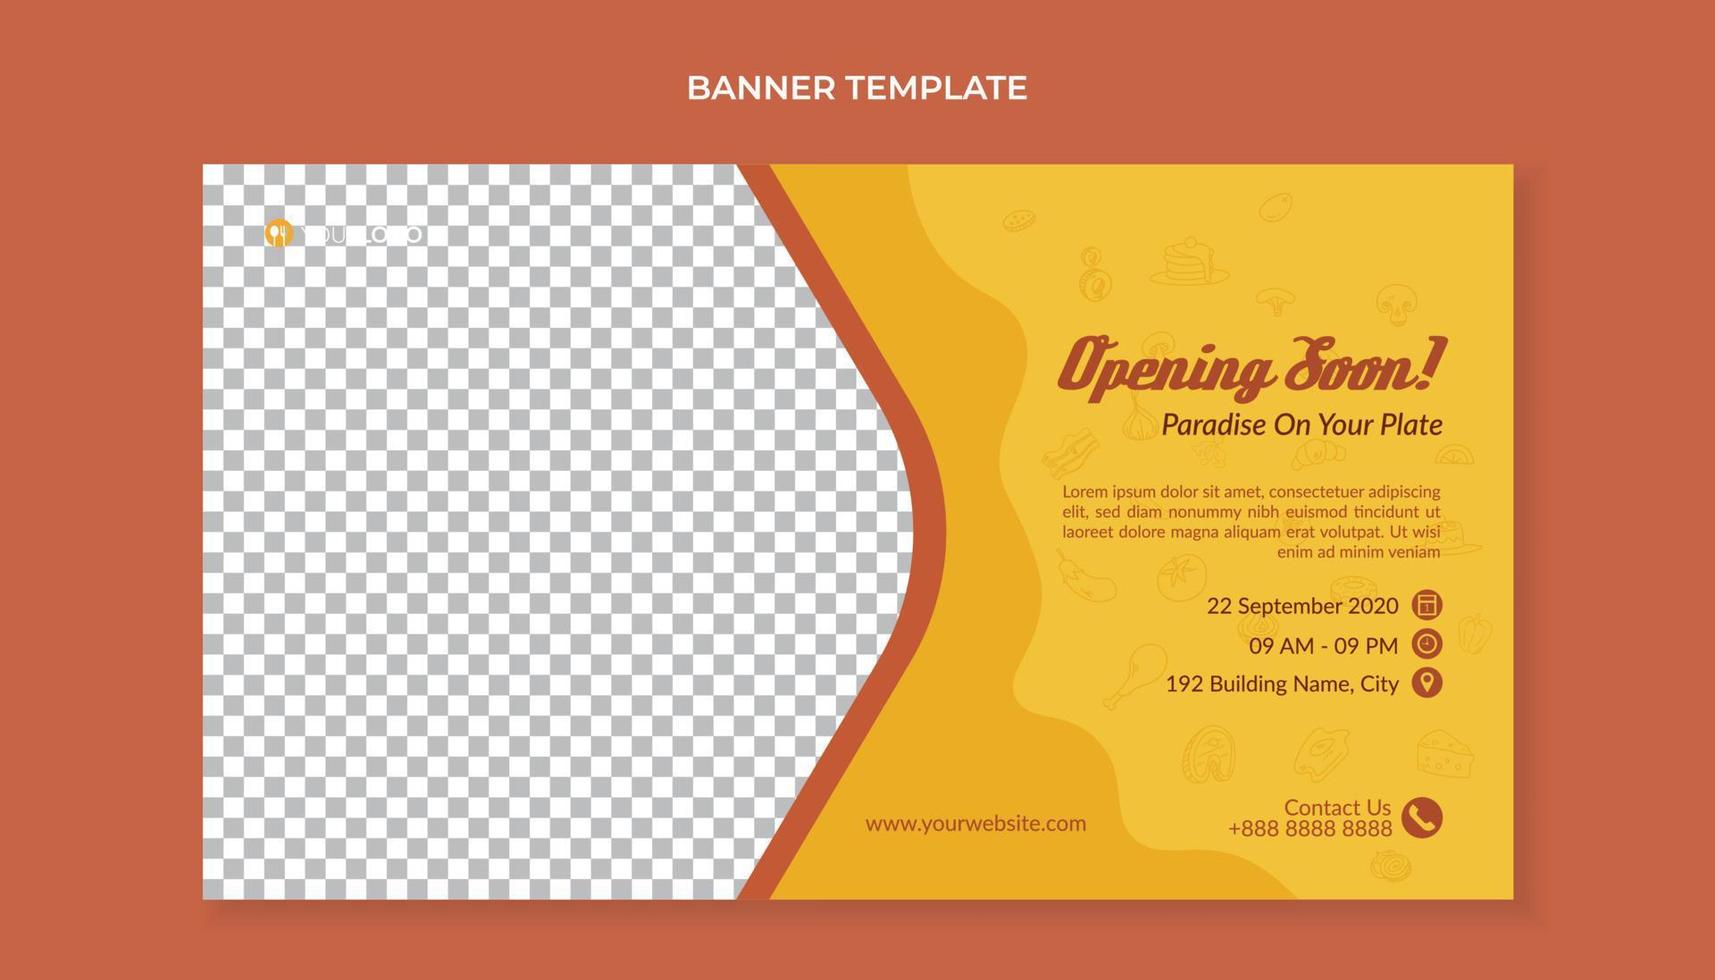 Opening soon banner template for restaurant and cafe vector